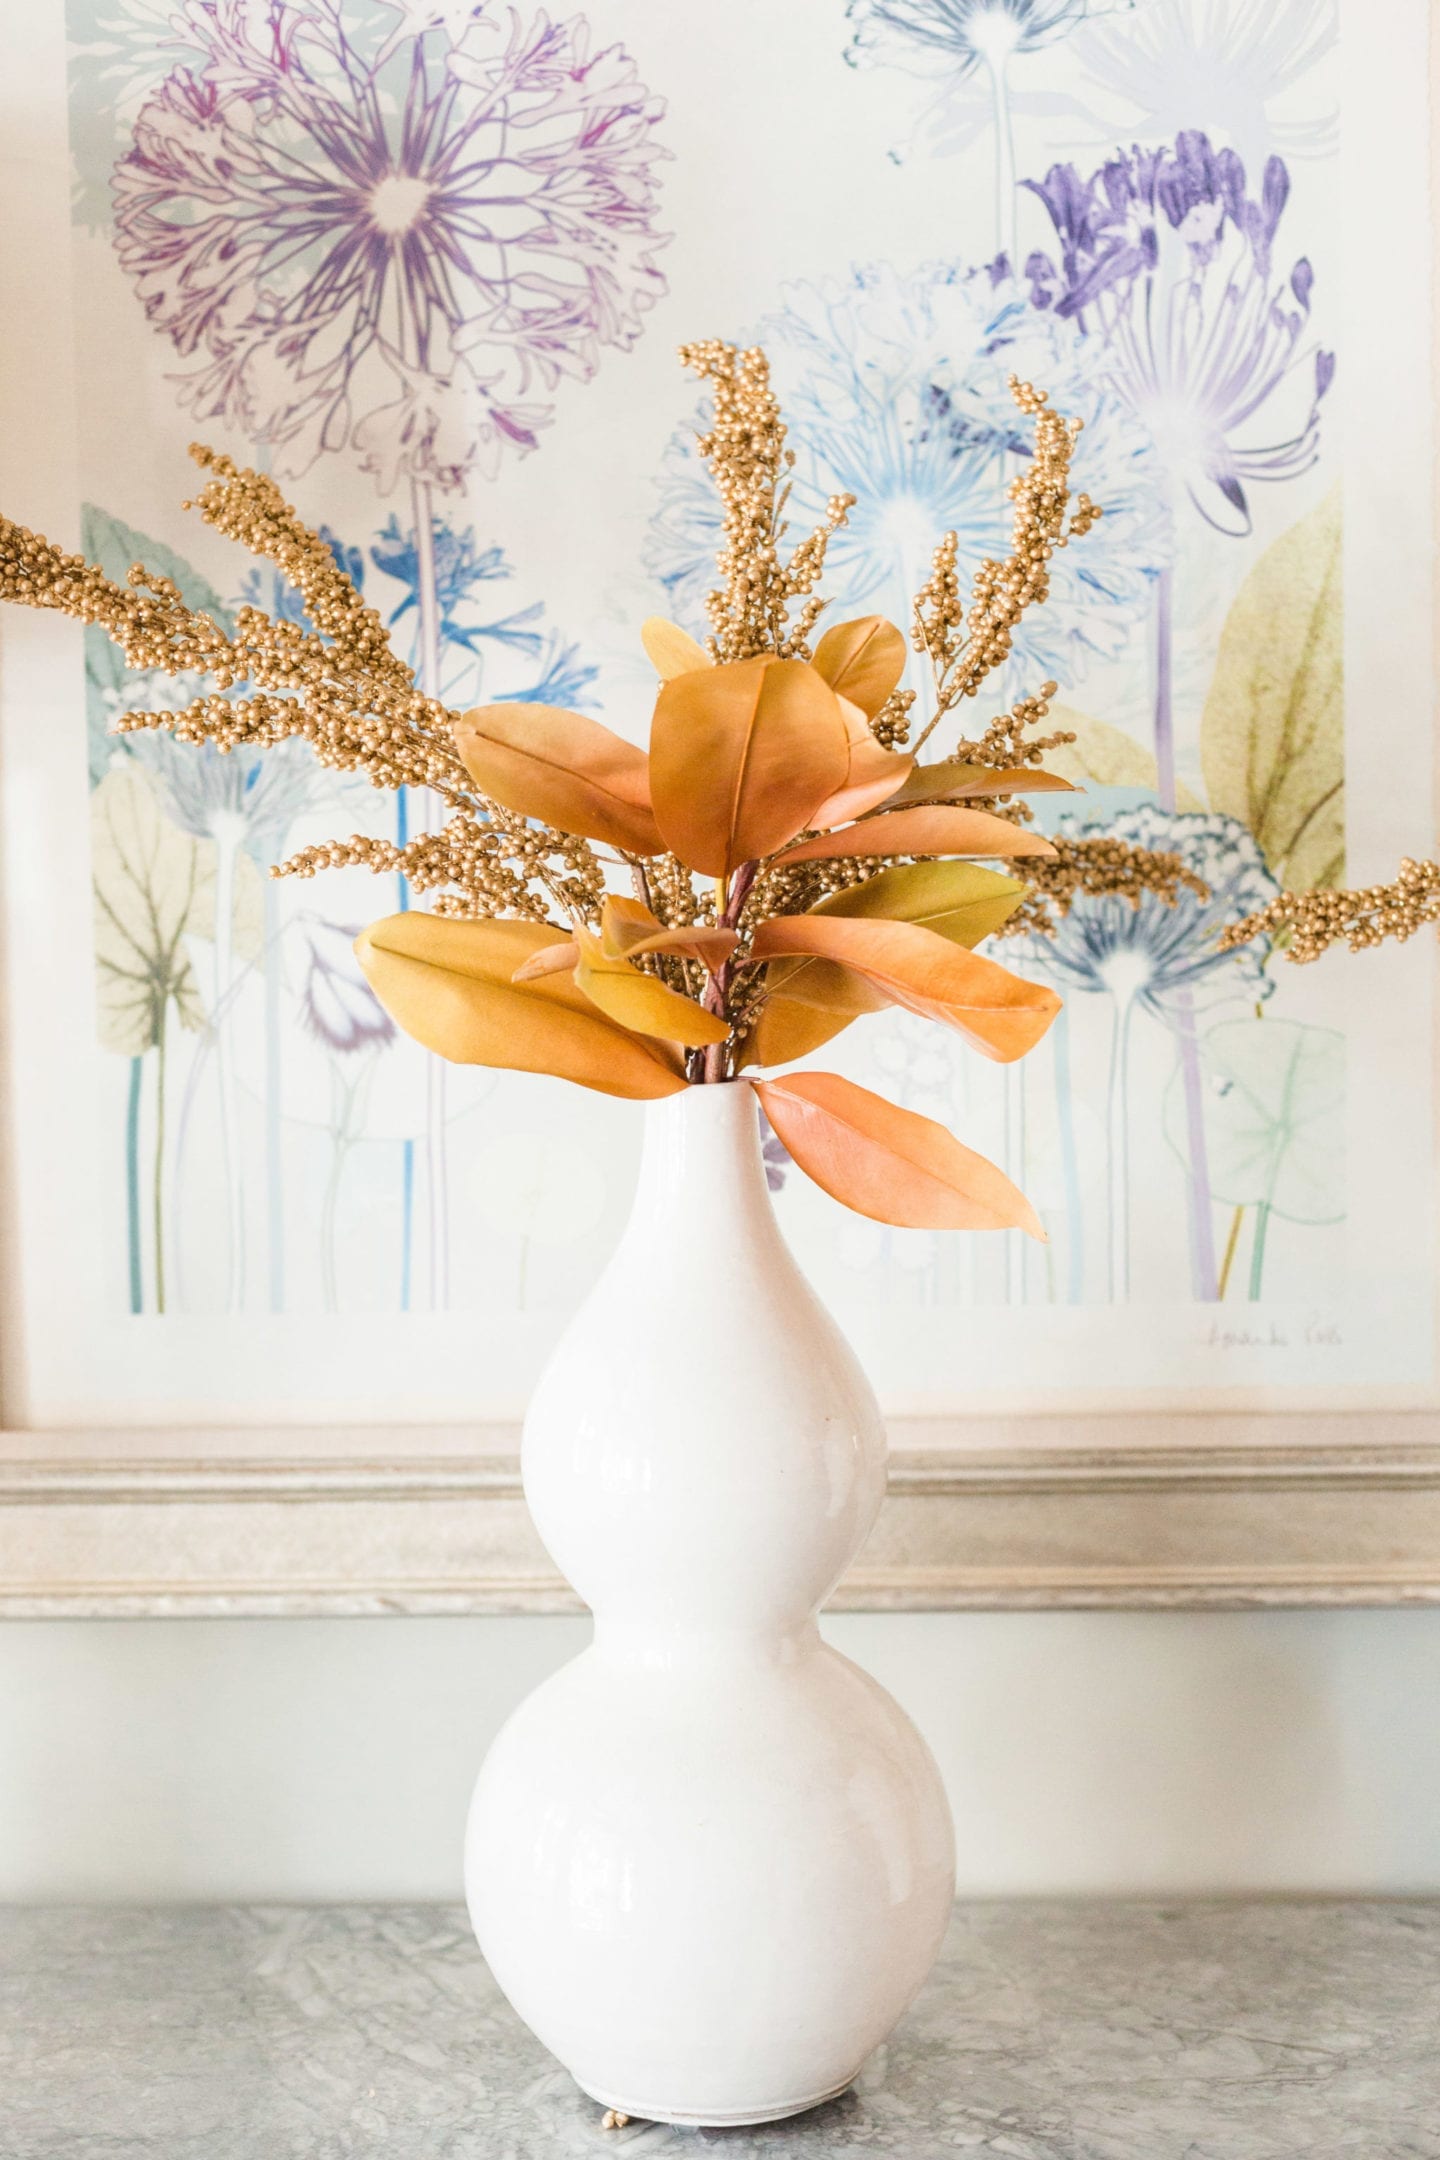 Fake Fall Flower arrangements for autumn decorations around the house.